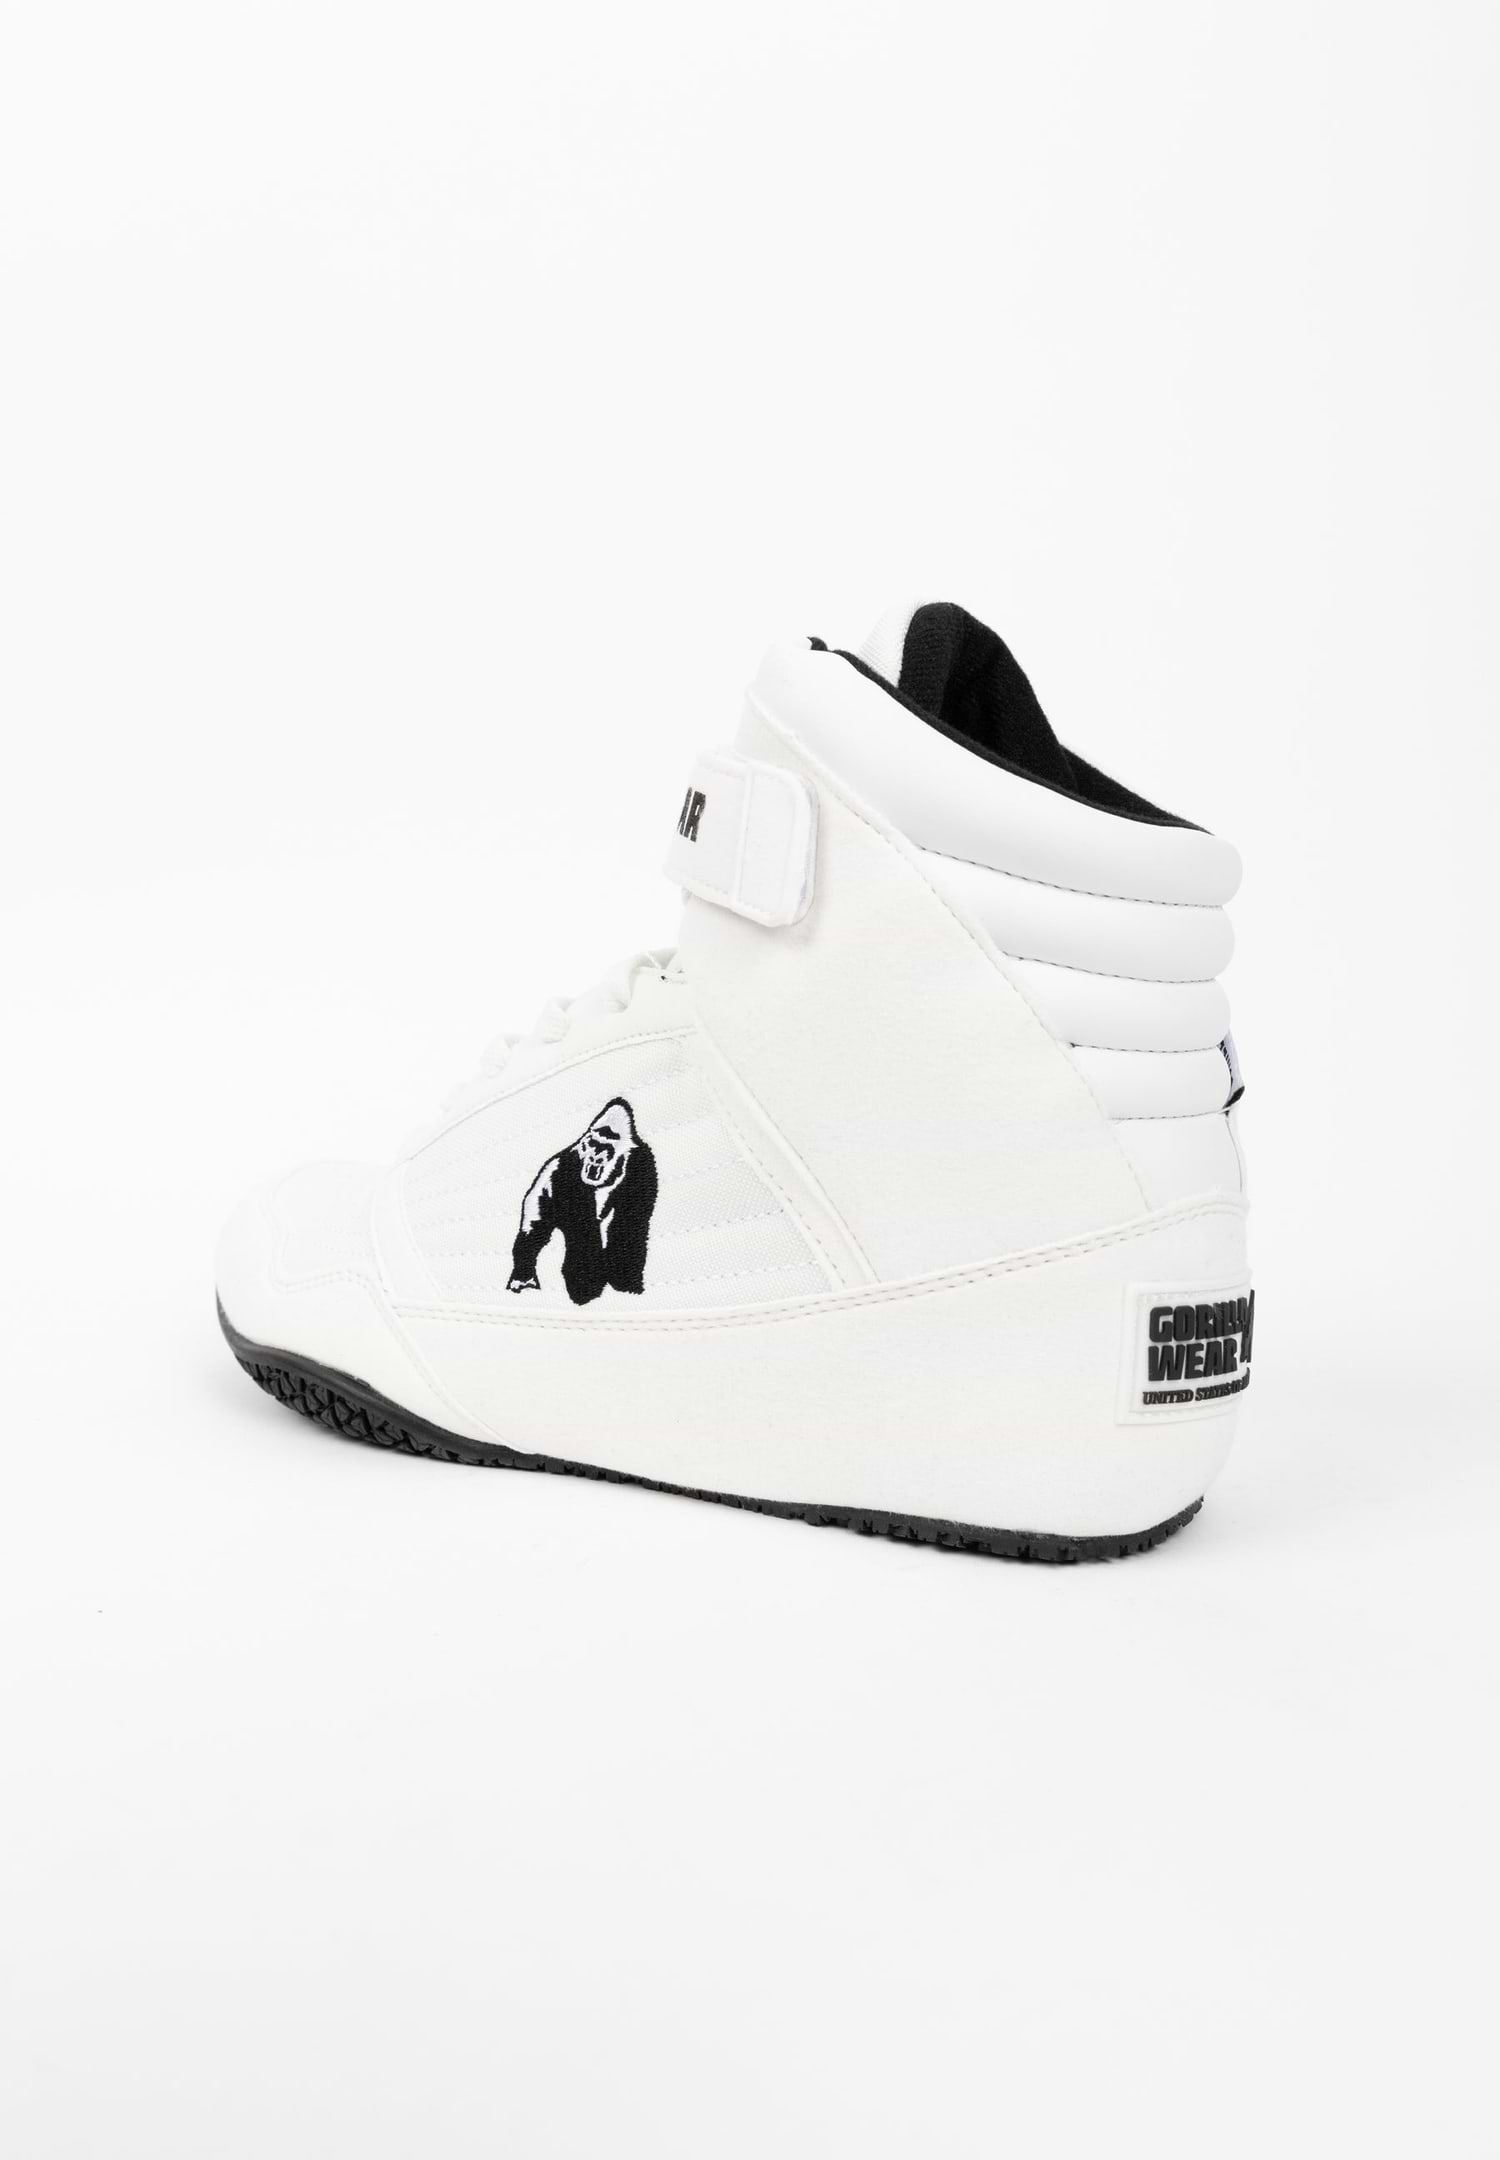 Clearance Sales Gorilla Wear High Tops Heavy Weight Lifting Shoes EUR 39-48 White 41 / White